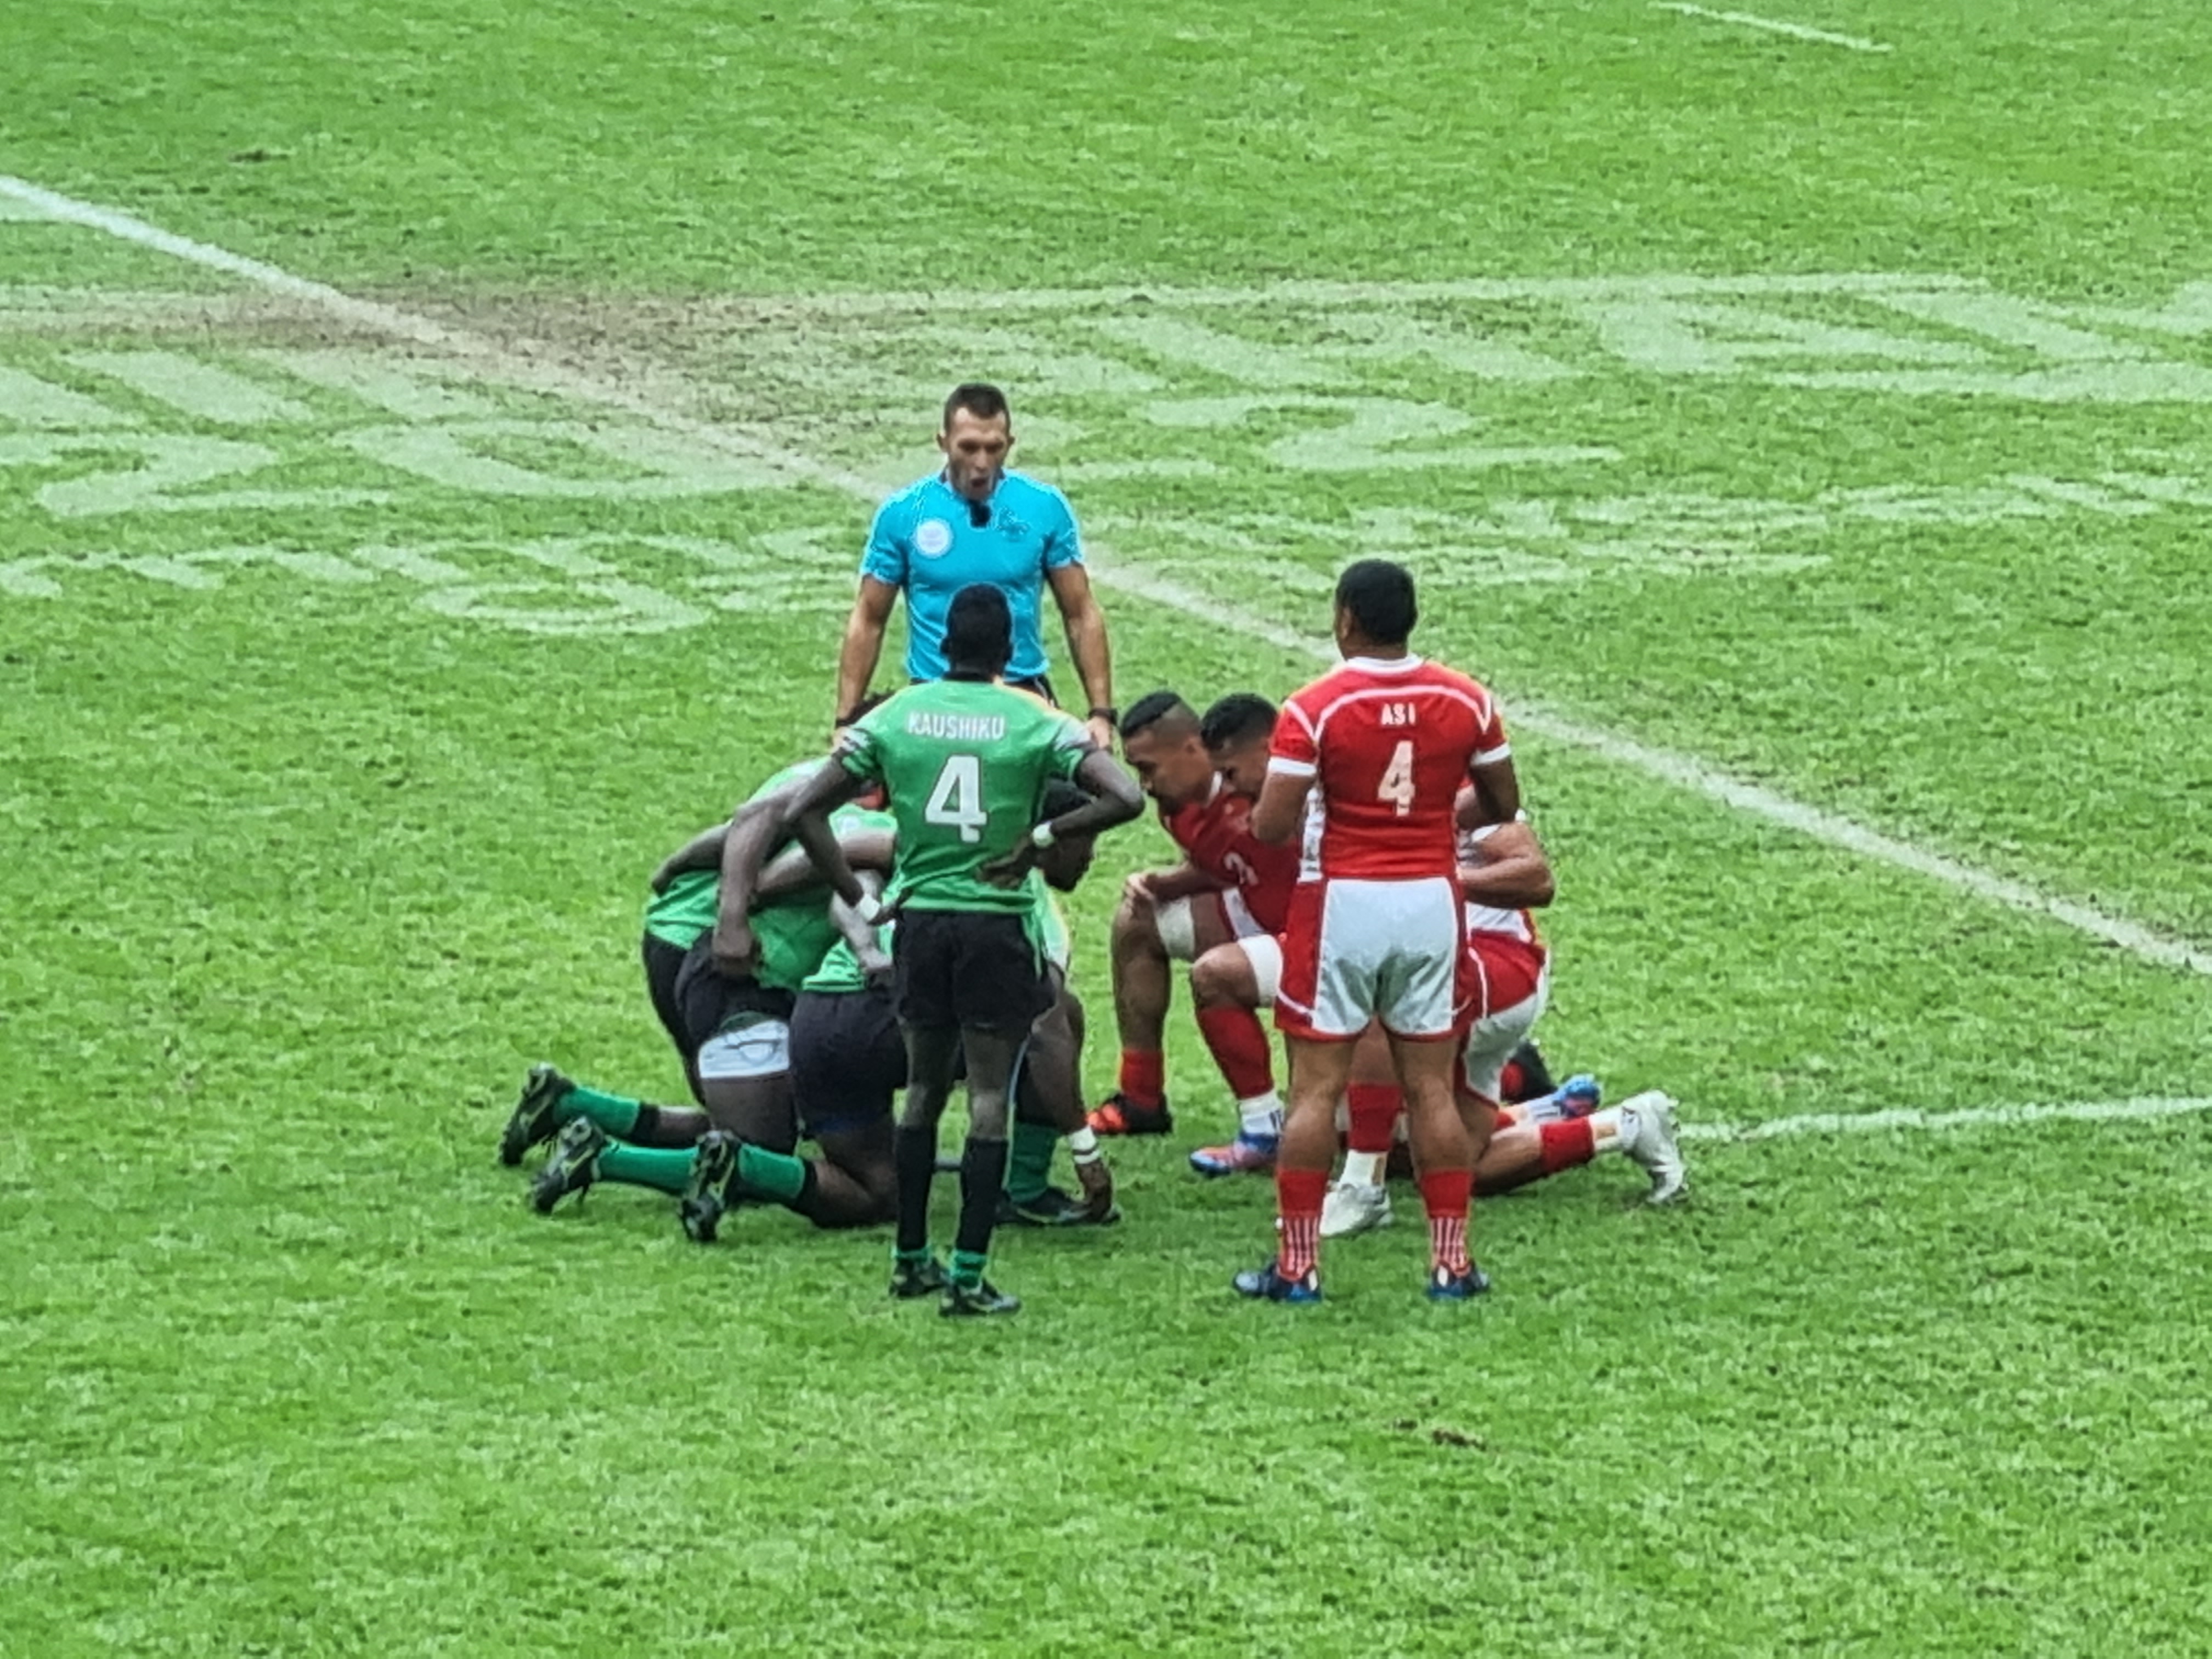 FileMens rugby sevens at the 2022 Commonwealth Games - Tonga vs Zambia 192719.jpg